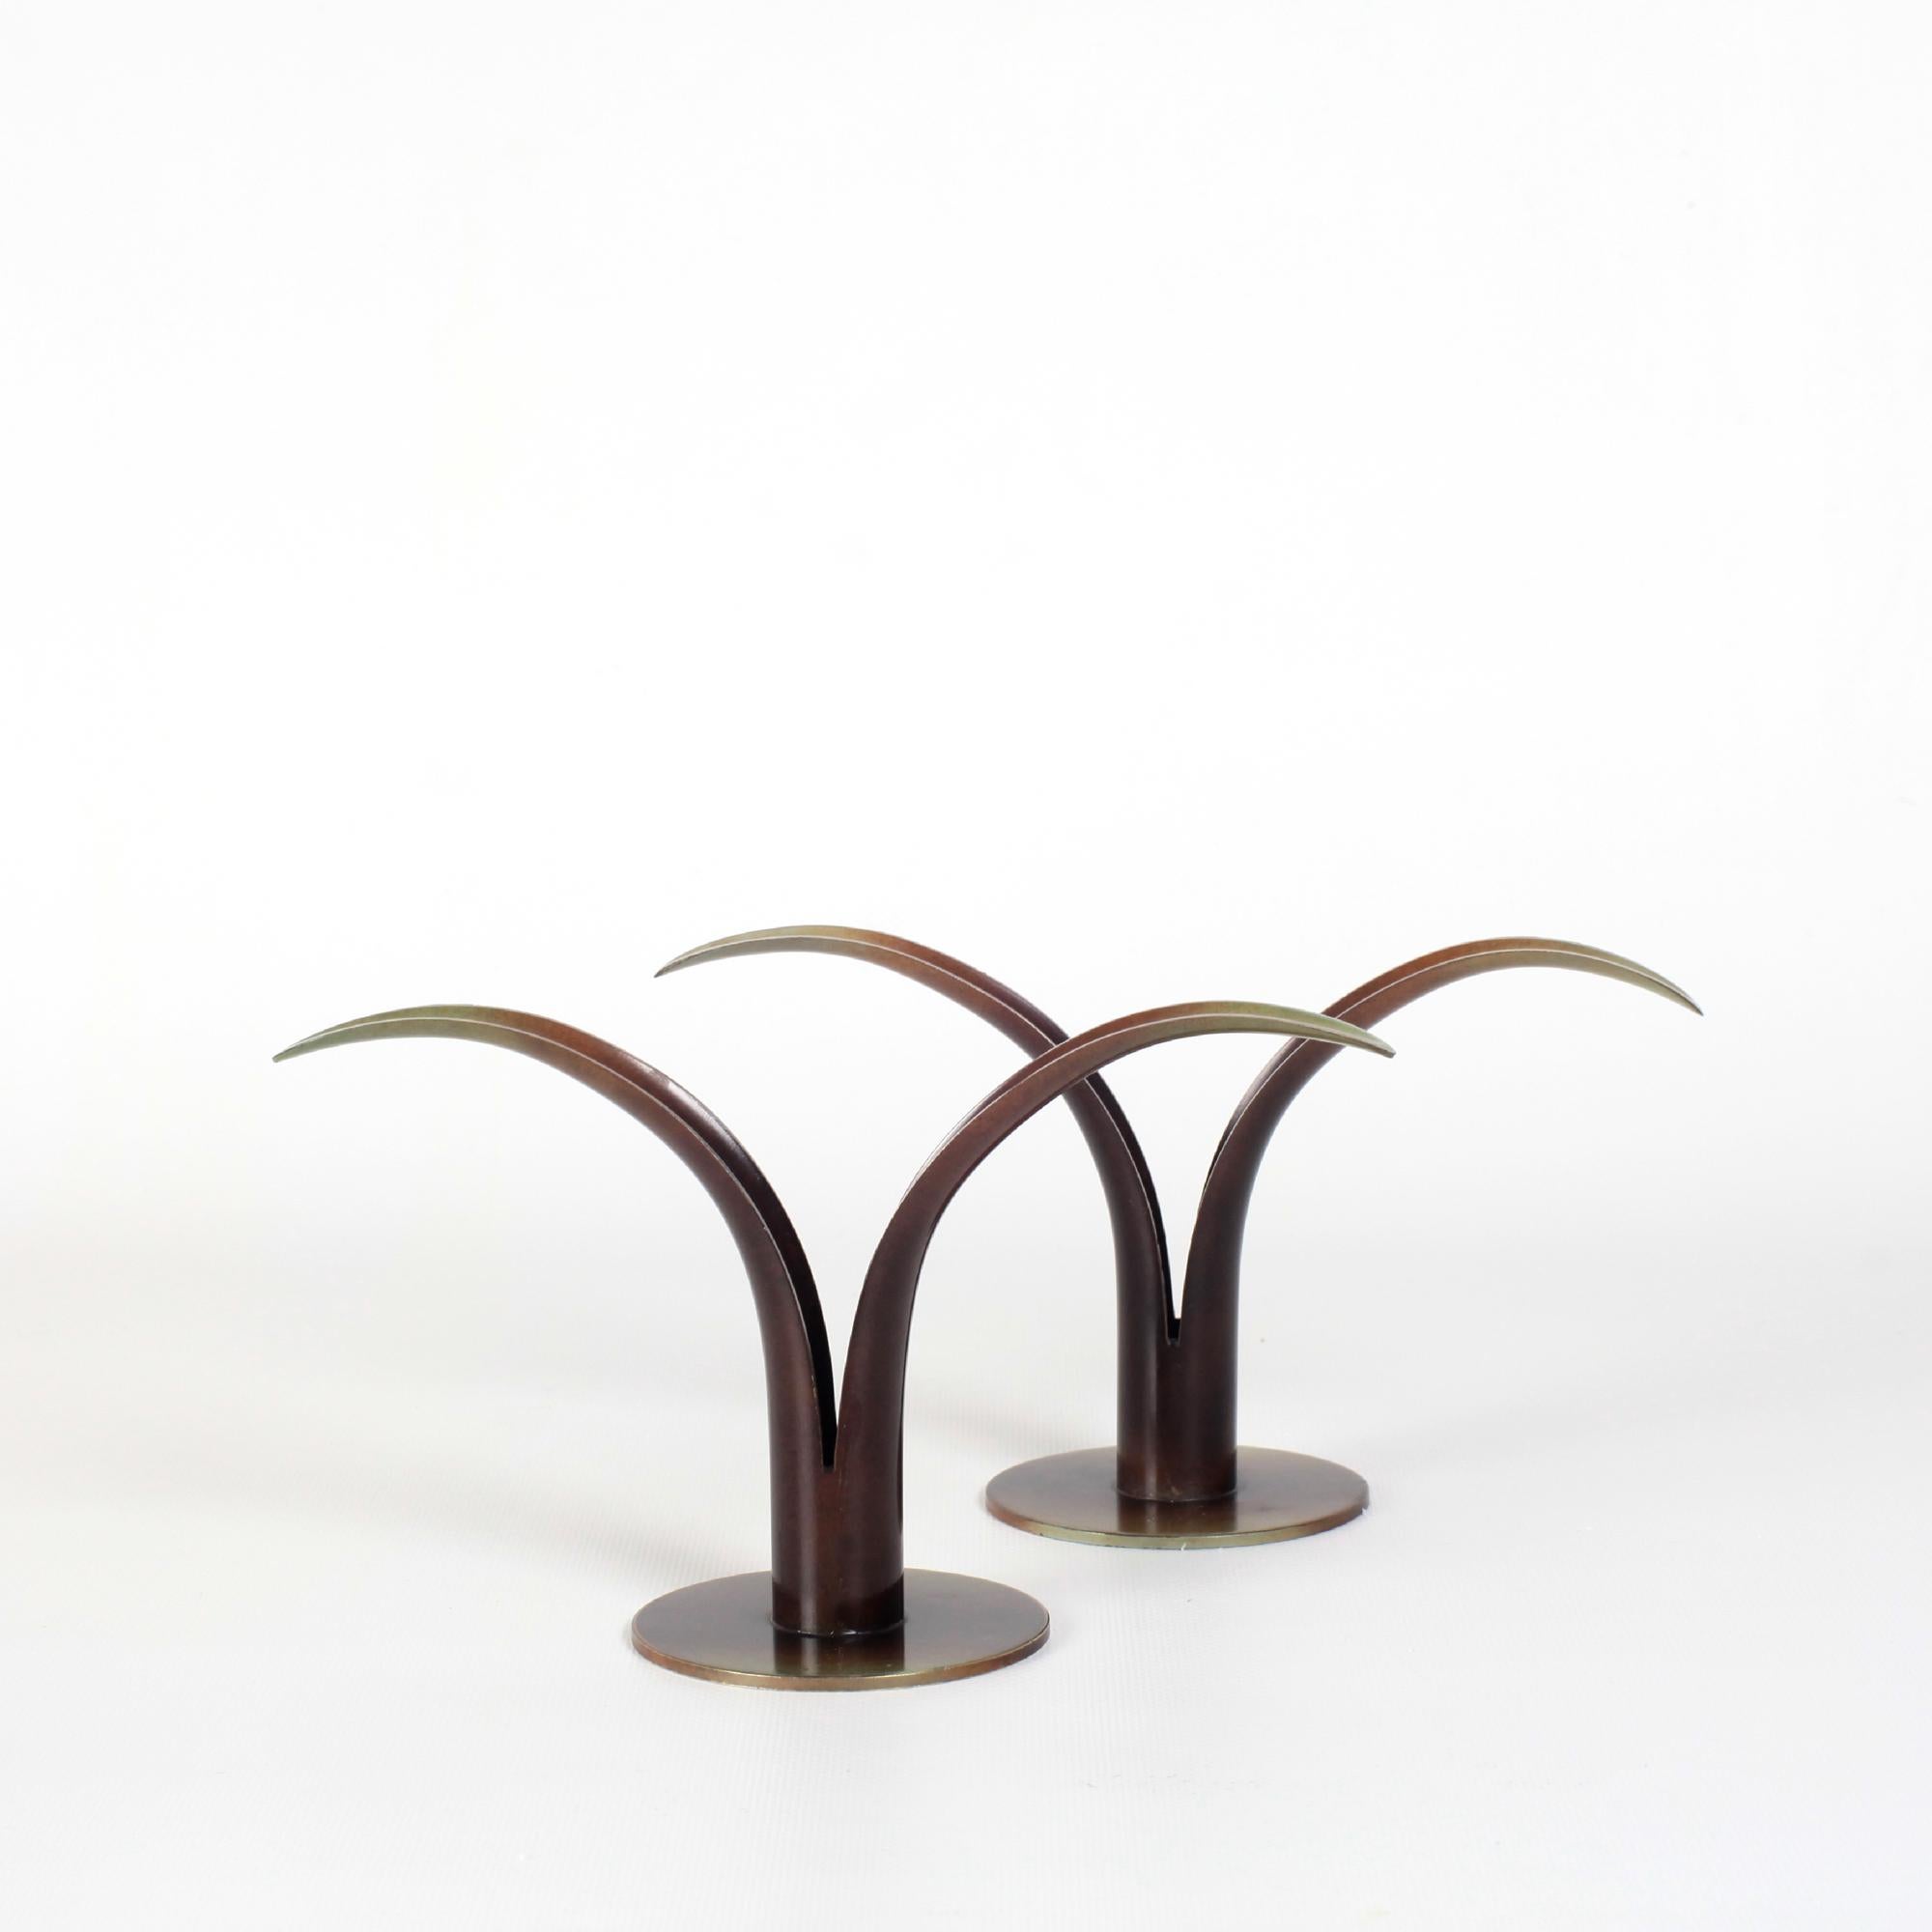 Rare pair of candlesticks model Lily
created in 1939 for the New York World's Fair
by Ivar Ålenius Björk for Ystad Brons
Sweden 1940s
Brass with brown and green bronze patina finish
Marked under the base with the artist's IAB monogram
and